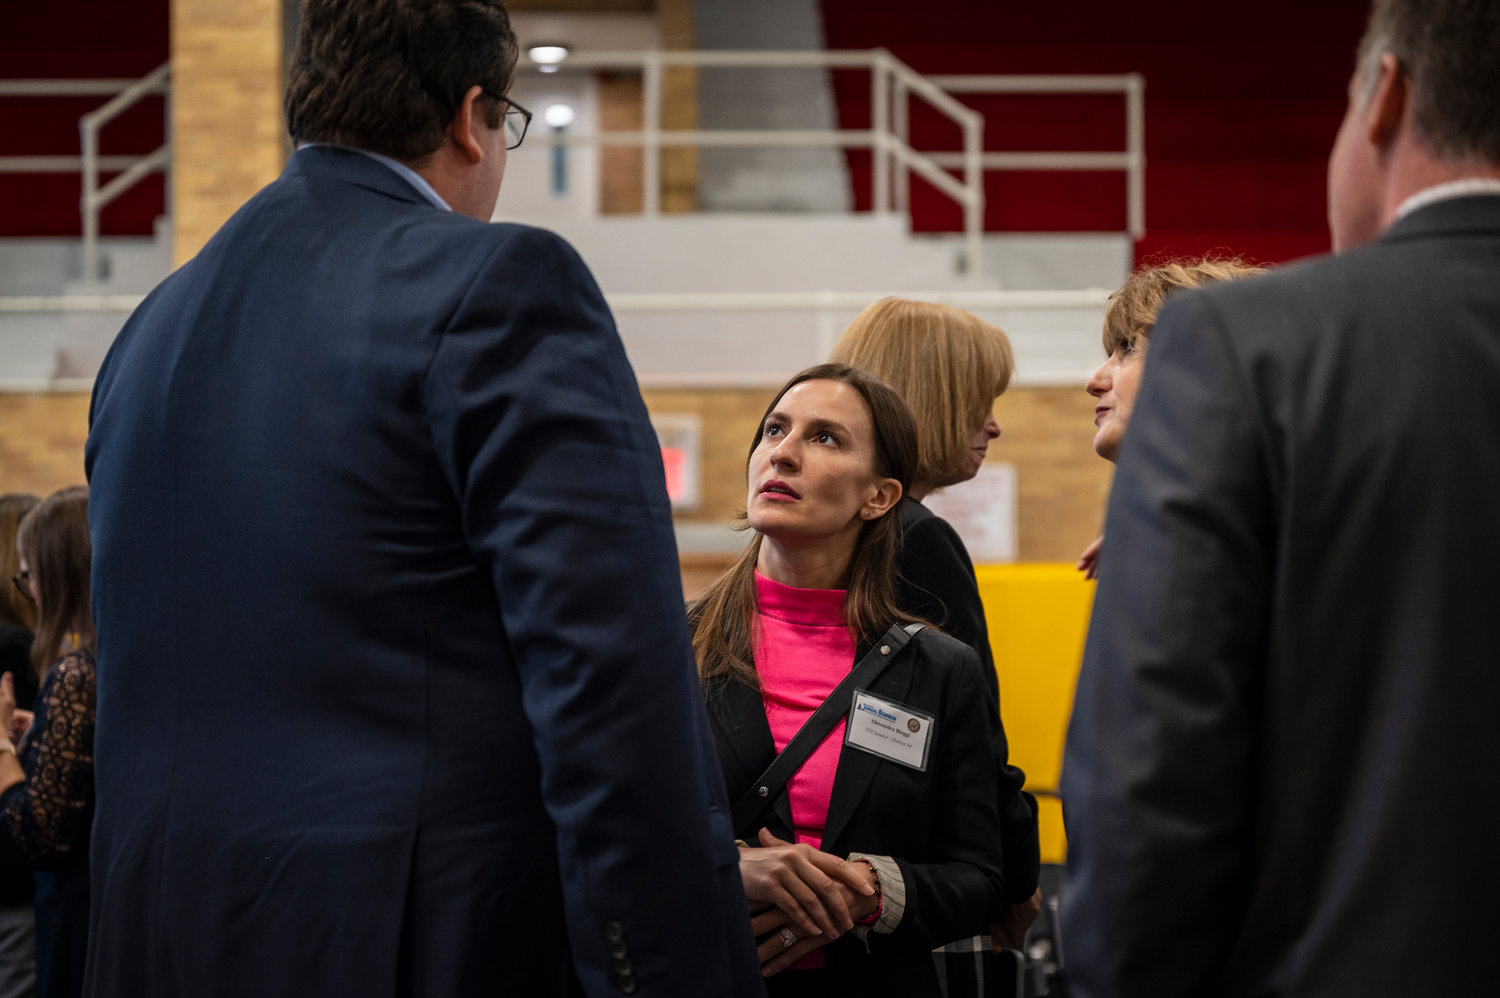 State Sen. Alessandra Biaggi — who is running for the congressional seat currently held by Tom Suozzi — was one of a number of local elected invited to U.S. Rep. Jamaal Bowman’s town hall with House Speaker Nancy Pelosi at the College of Mount Saint Vincent earlier this week.